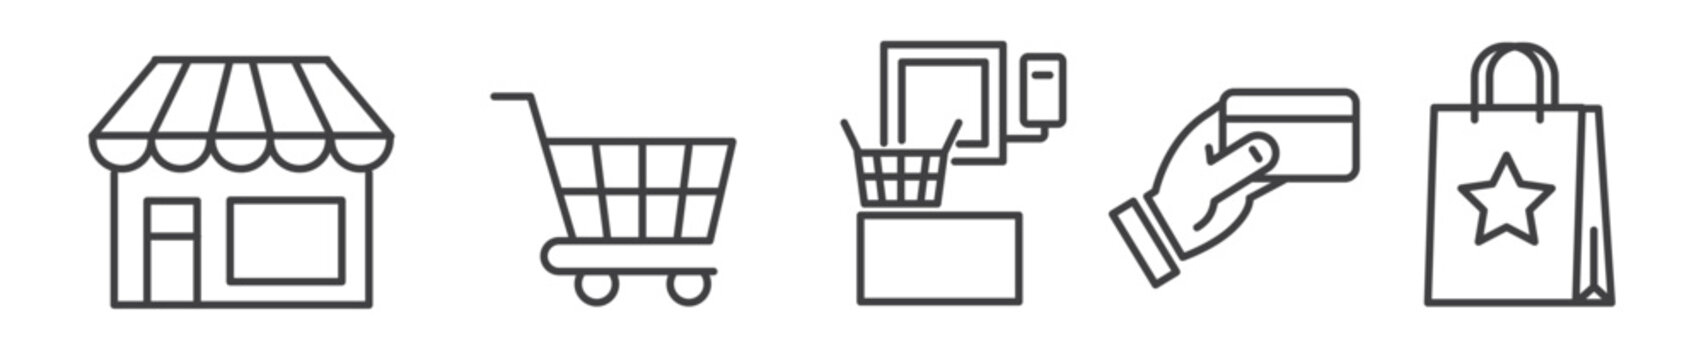 Shopping icons set - retail, grocery and and cashless payment at the self-service checkout vector illustration thin line icon collection